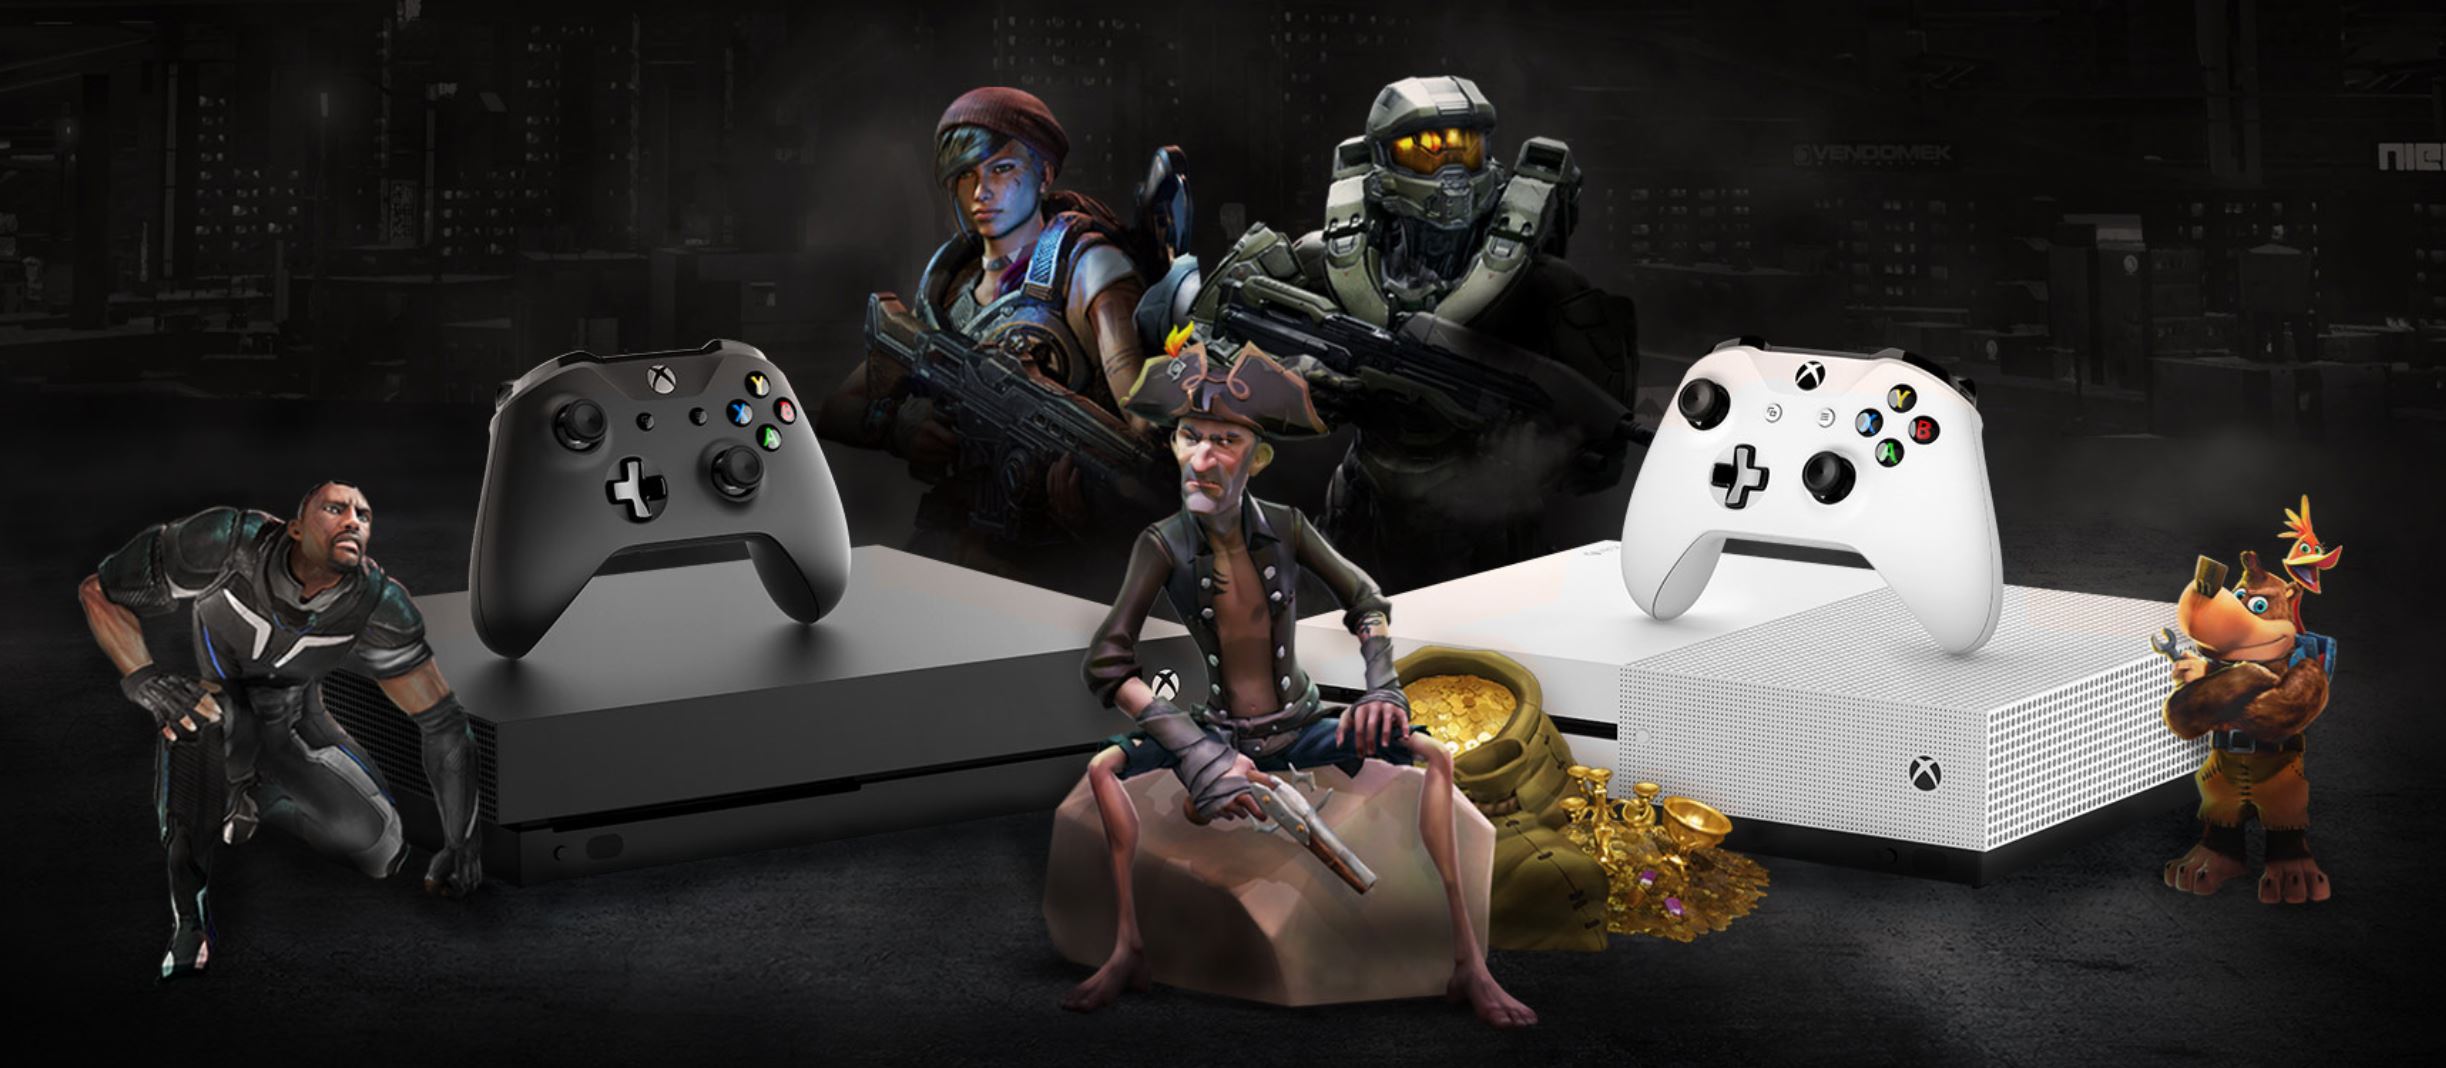 Xbox characters sitting on Xbox One X